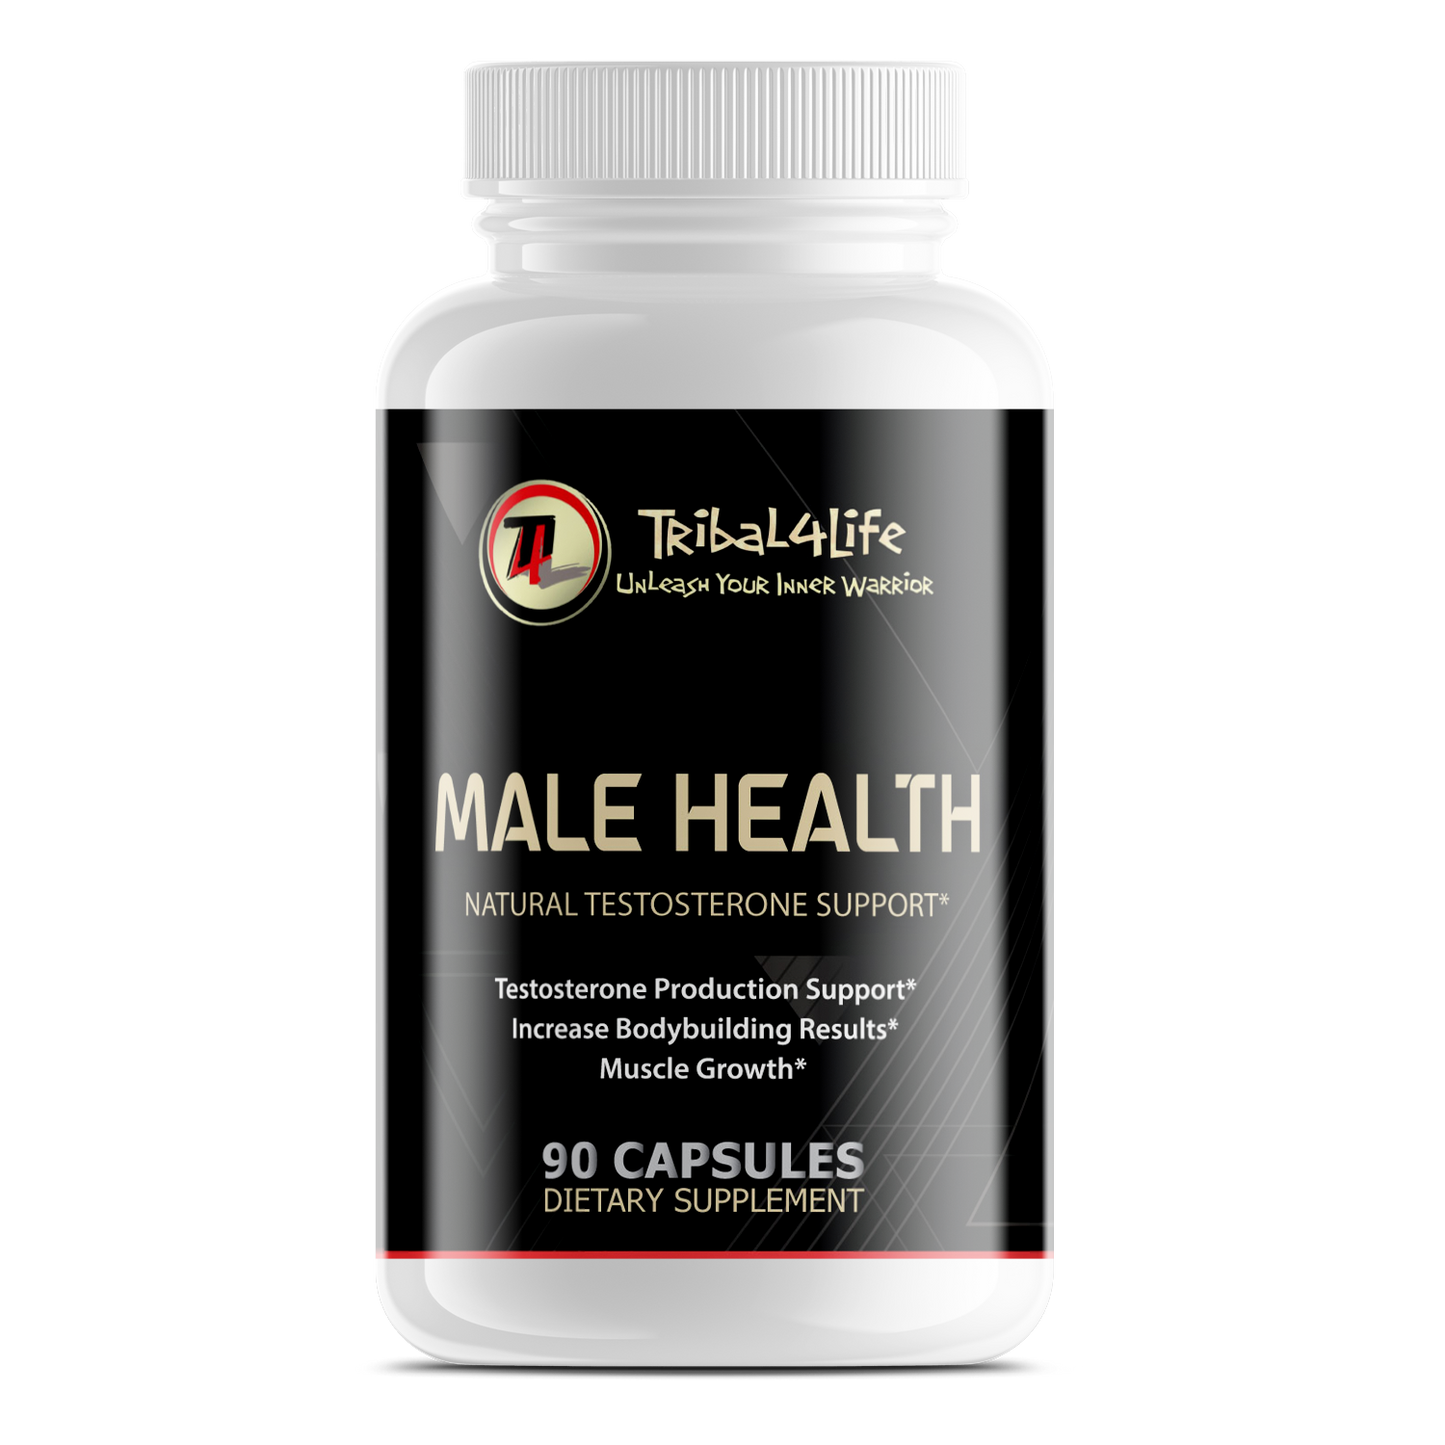 MALE HEALTH - Natural Testosterone Support